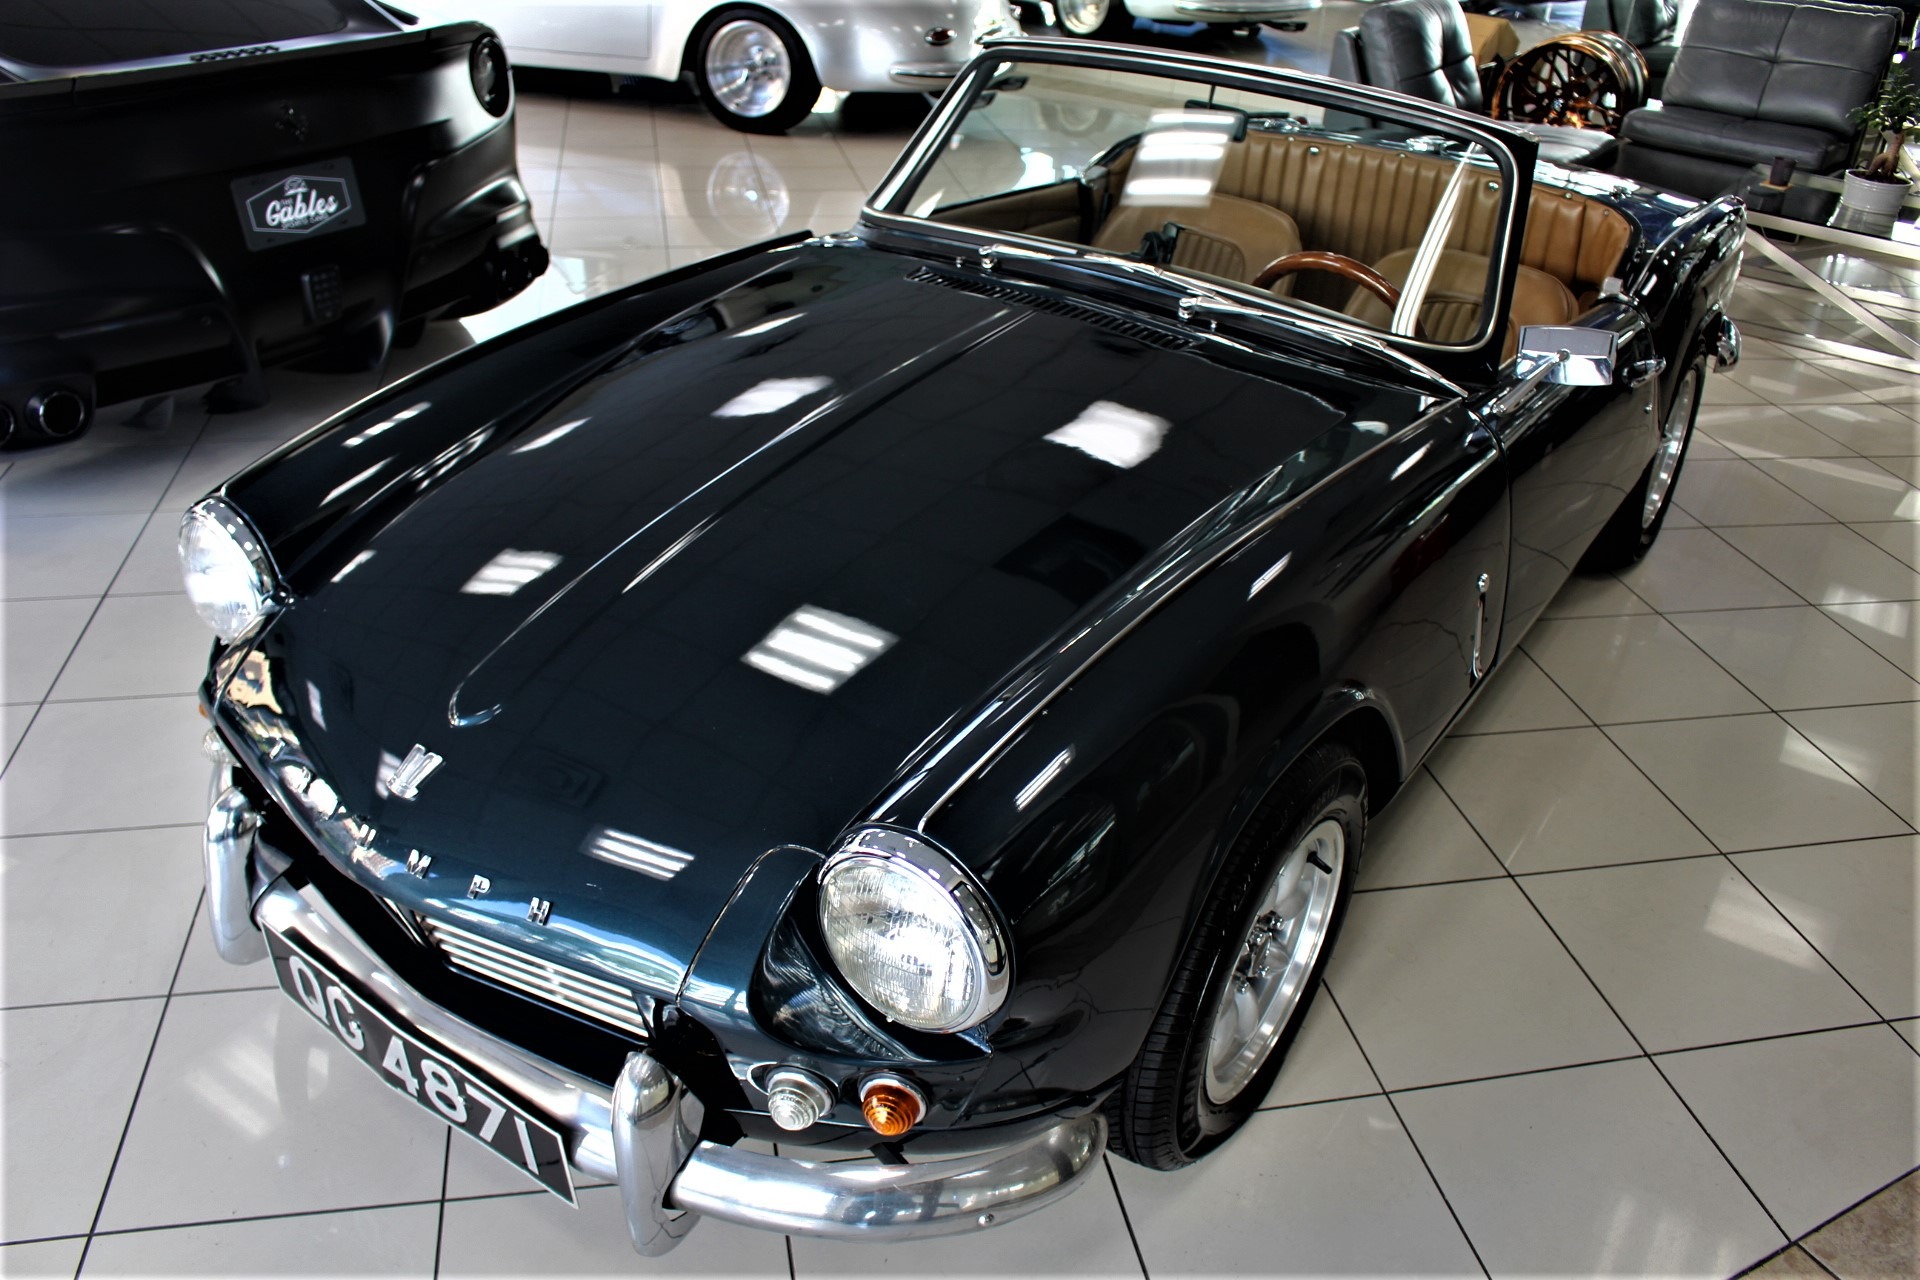 Used 1967 Triumph Spitfire for sale Sold at The Gables Sports Cars in Miami FL 33146 1